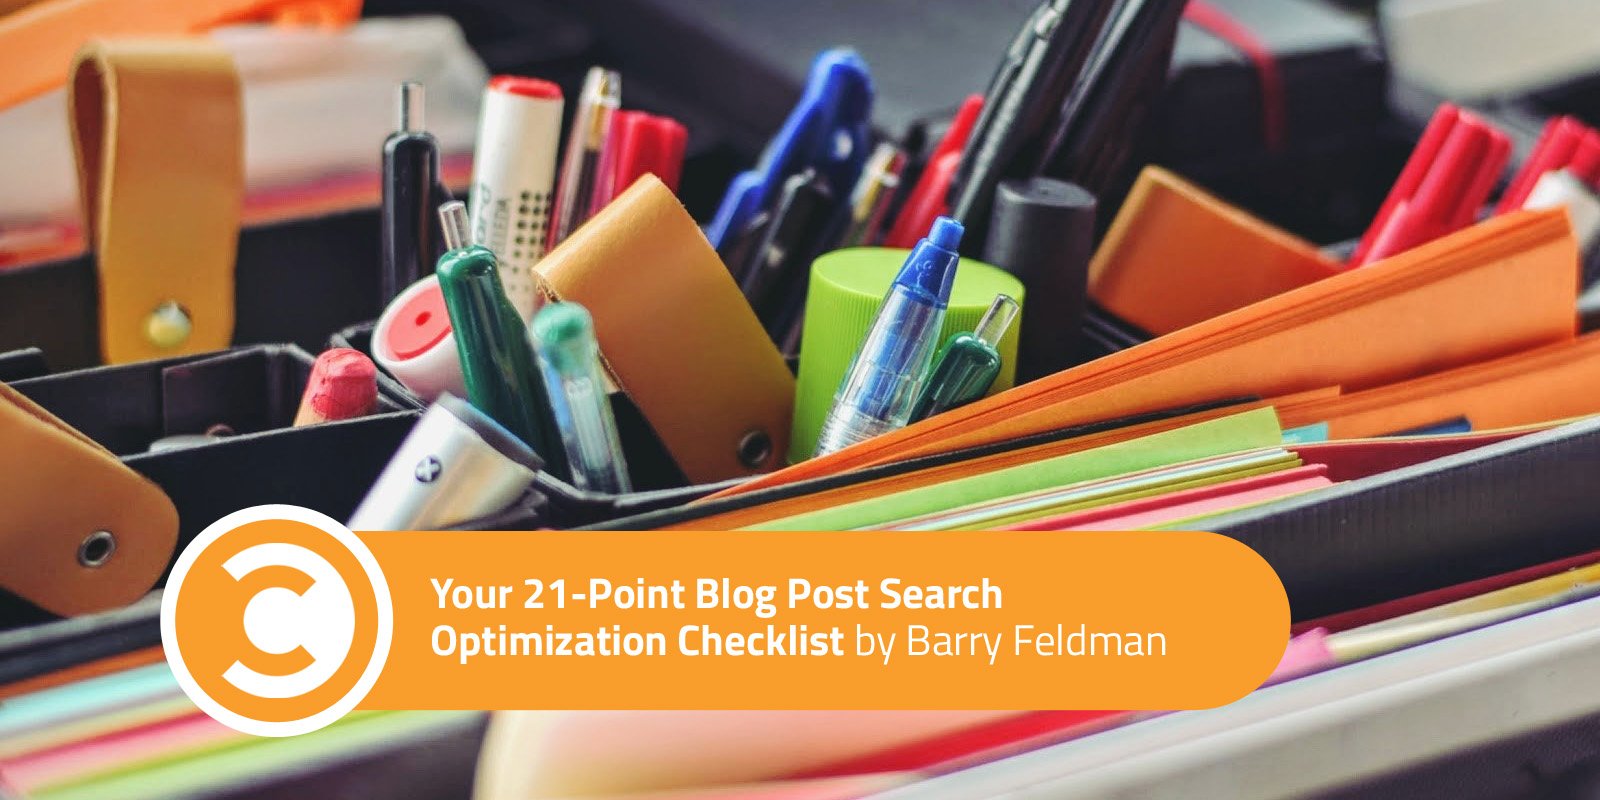 Your 21-Point Blog Post Search Optimization Checklist